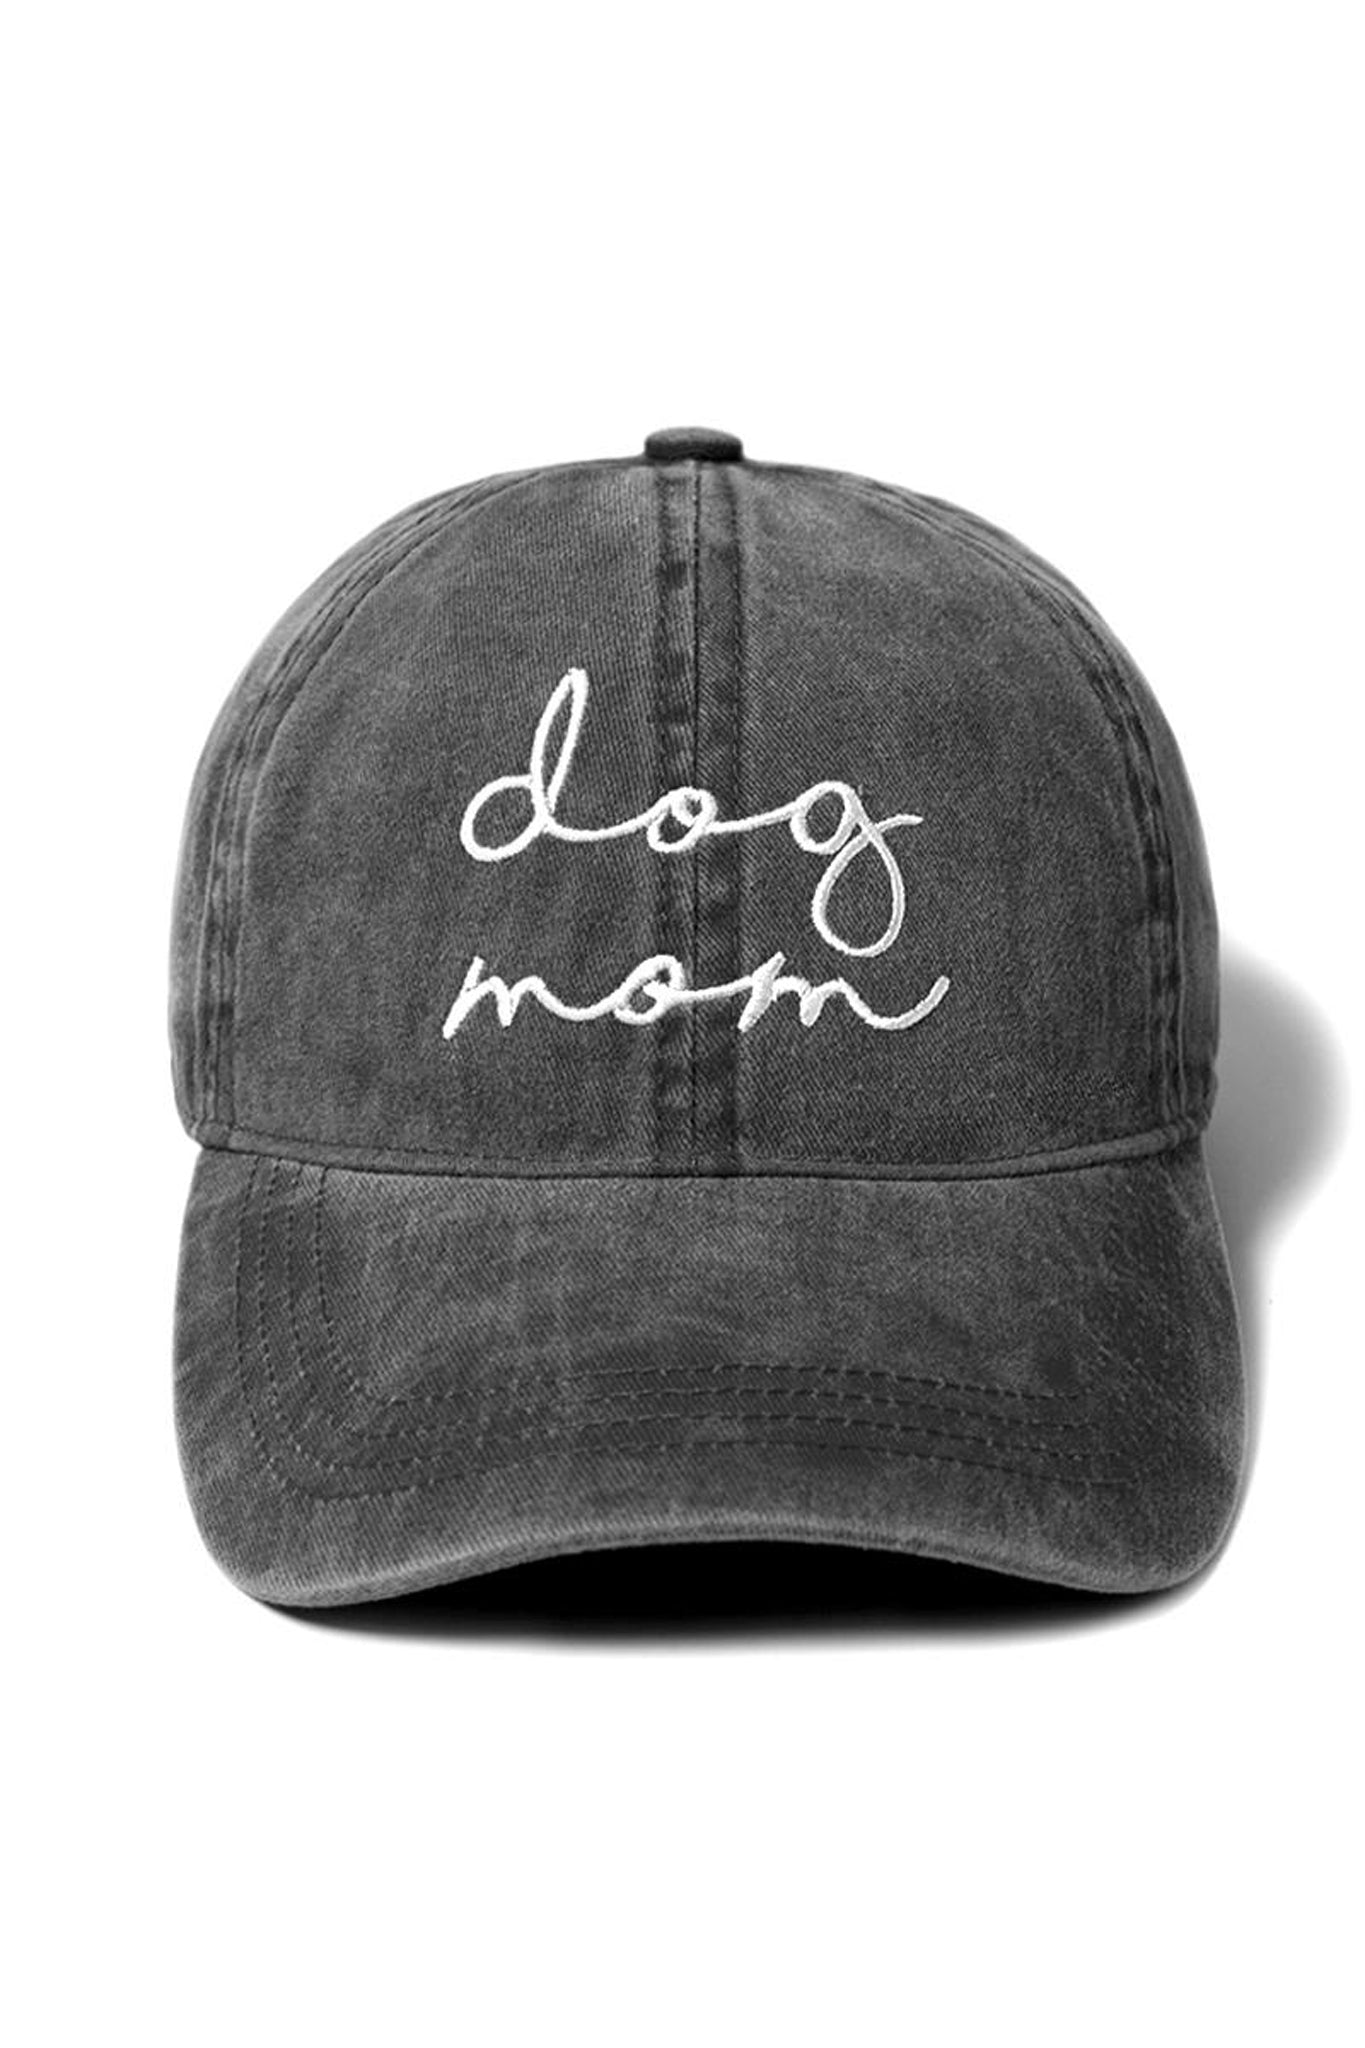 View 1 of Dog Mom Cap in Black, a Hats from Larrea Cove. Detail: Introducing the Dog Mom Cap in Black! This fun, yet soft and comfortable cap is...